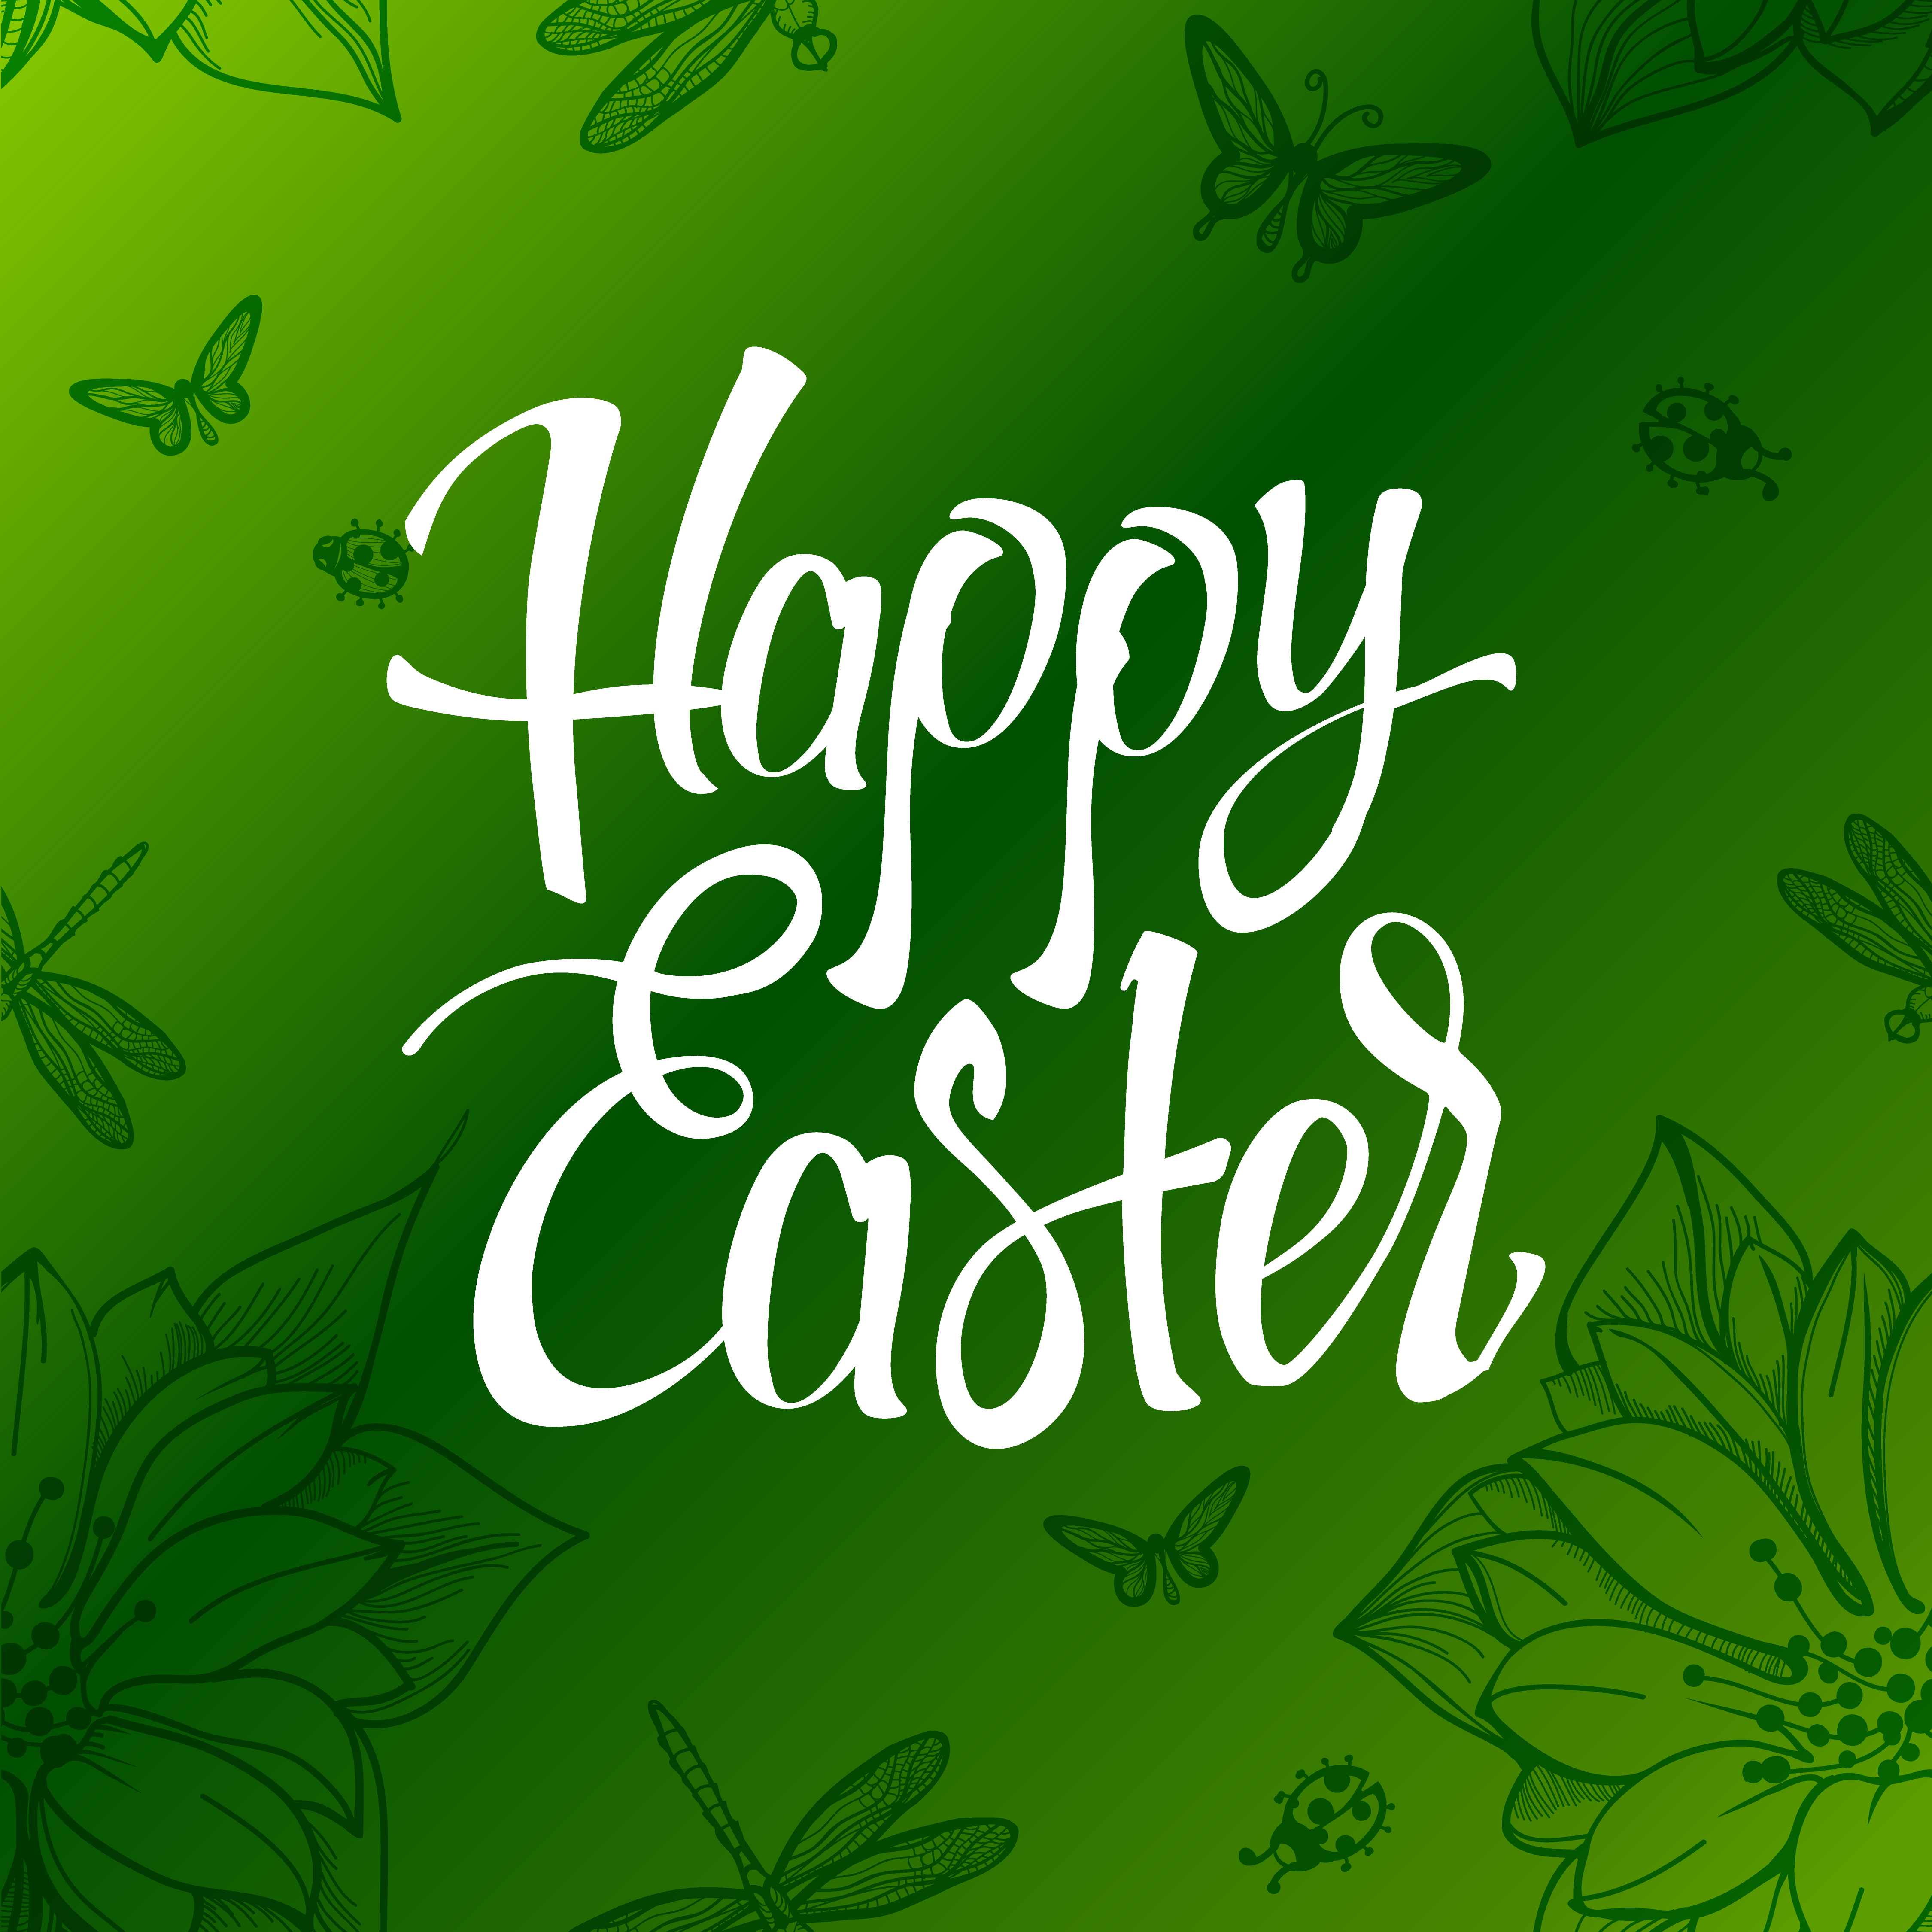 Happy Easter sign, symbol, logo on a green background with the flowers